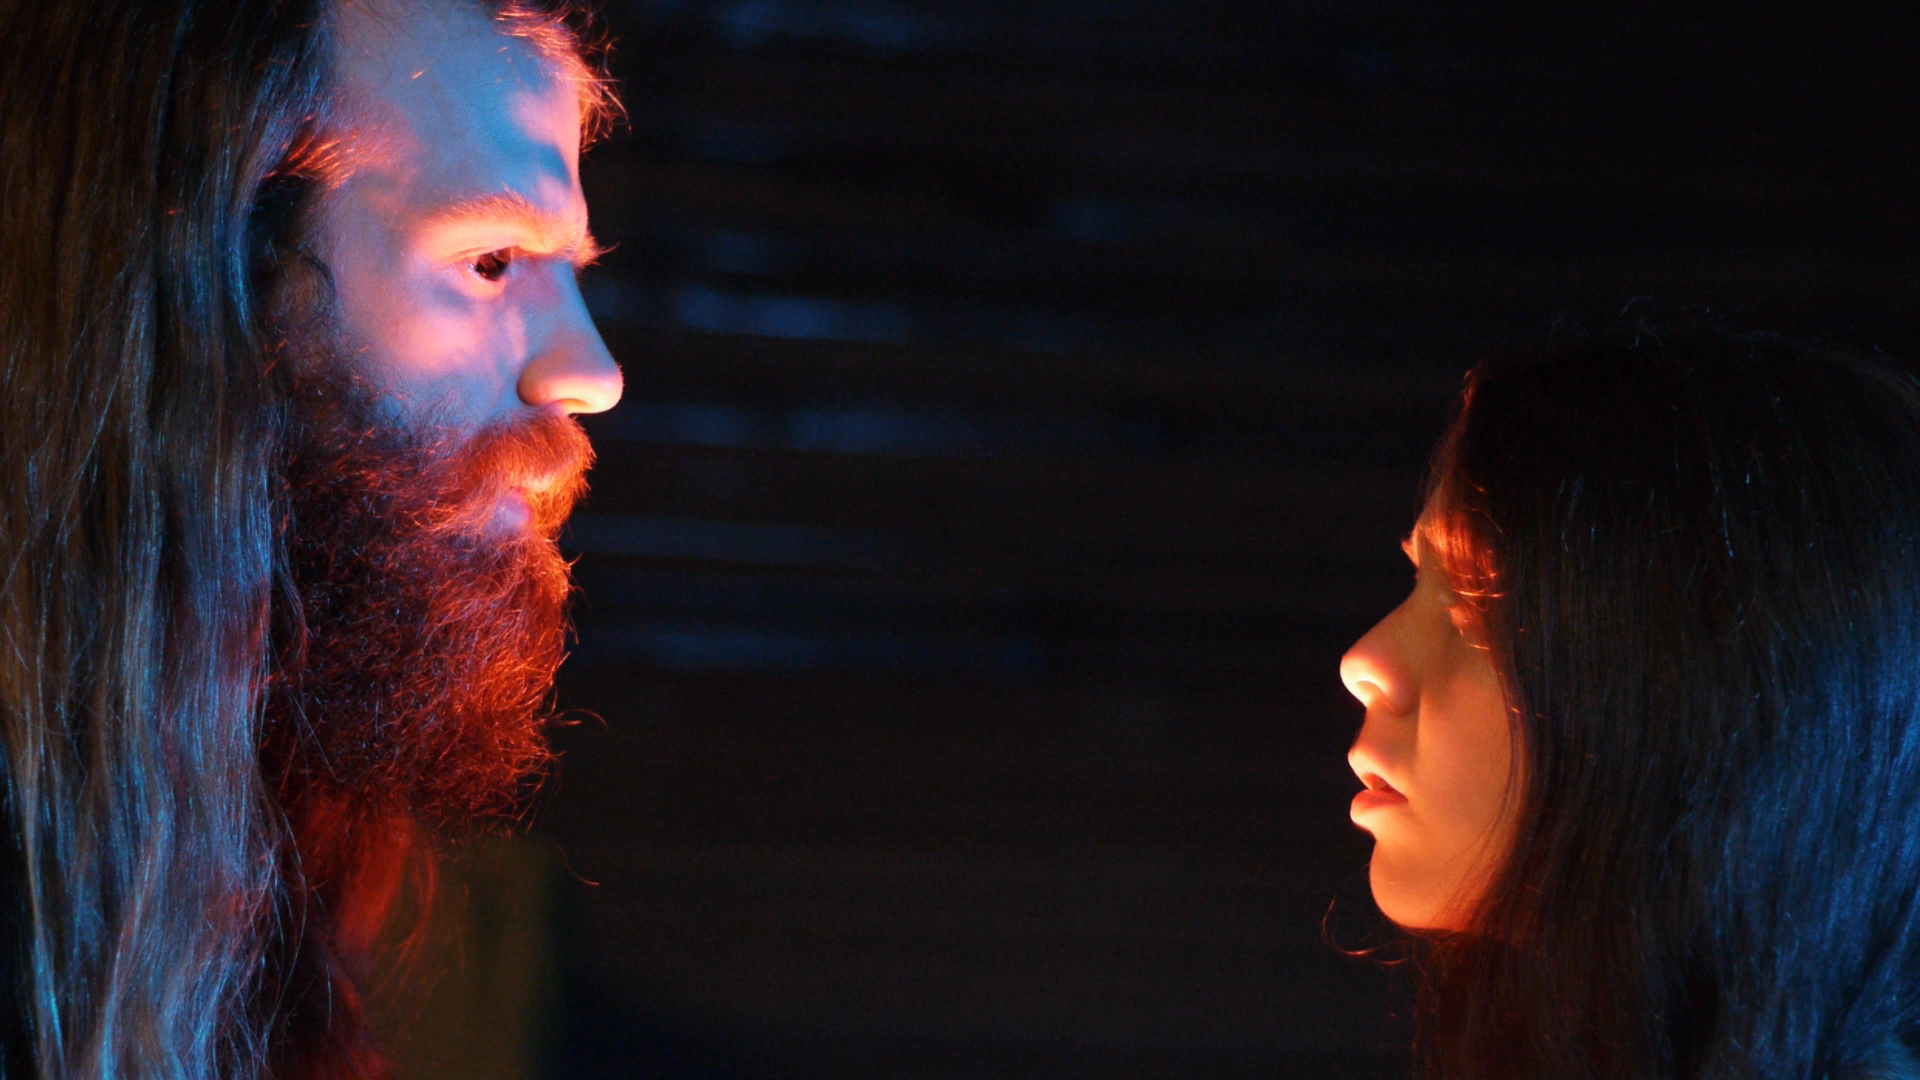 Still of James Sizemore and Ashleigh Jo Sizemore in The Demon's Rook